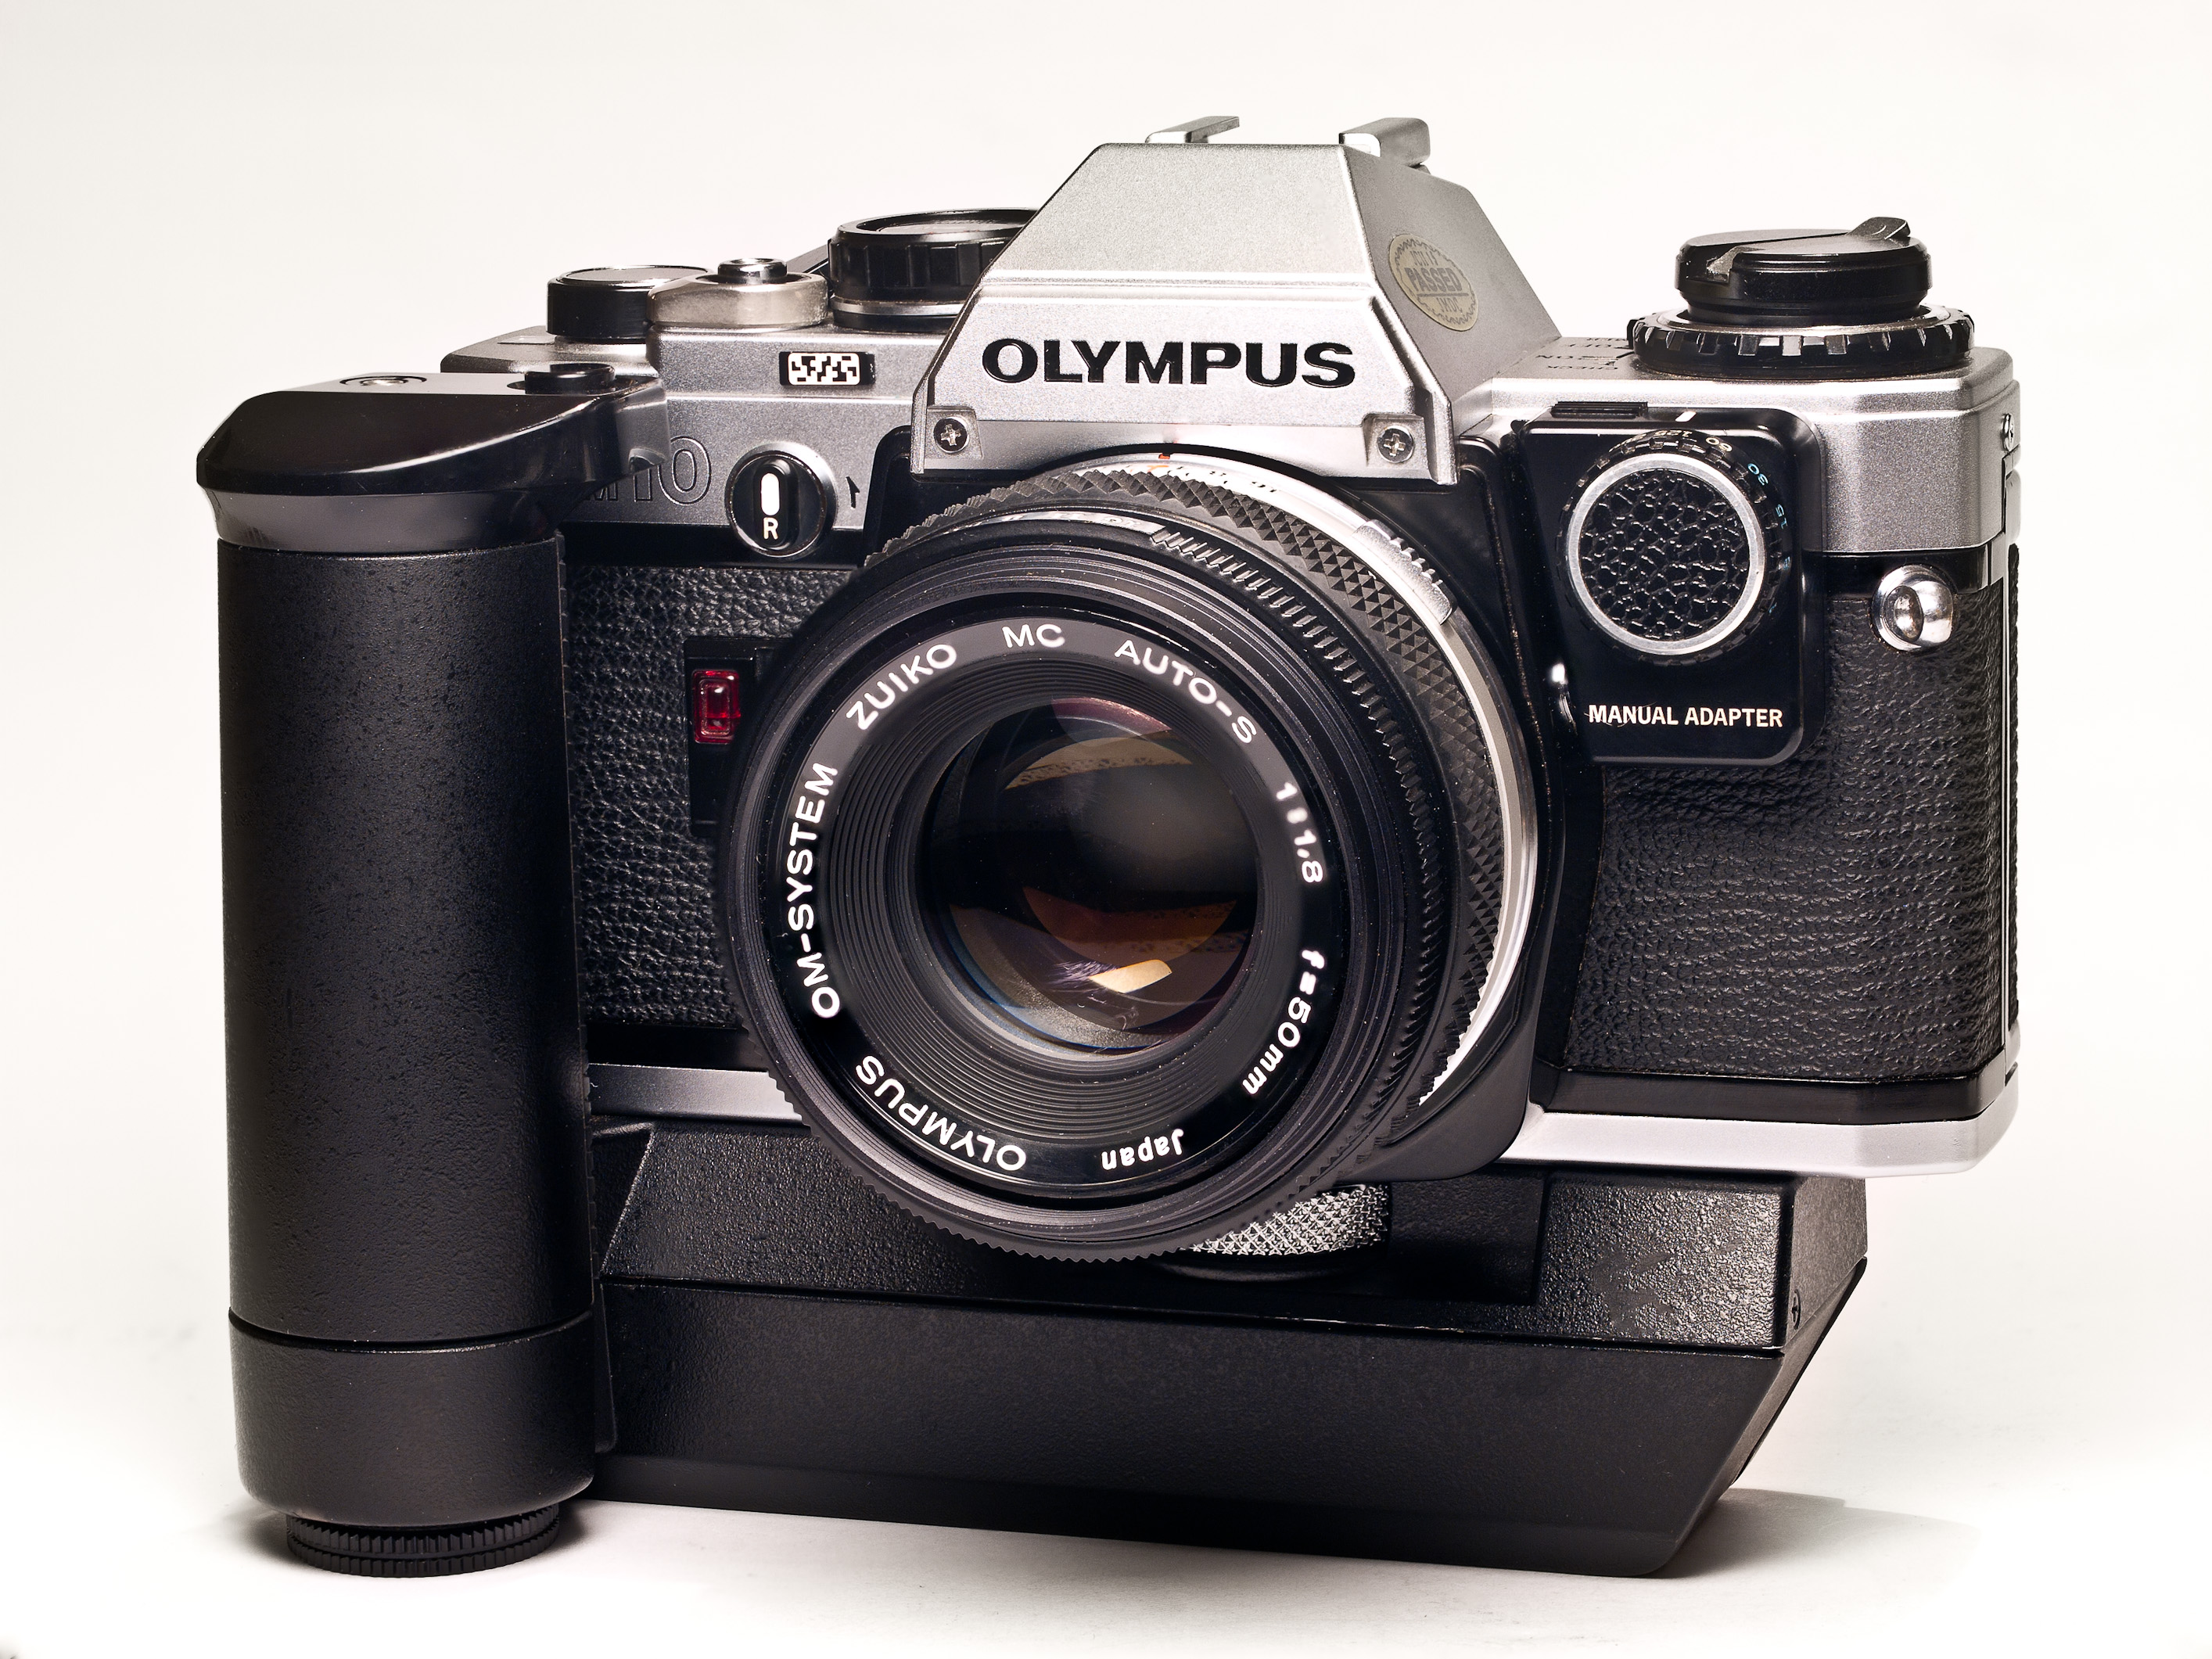 Olympus OM10 with winder and manual adapter